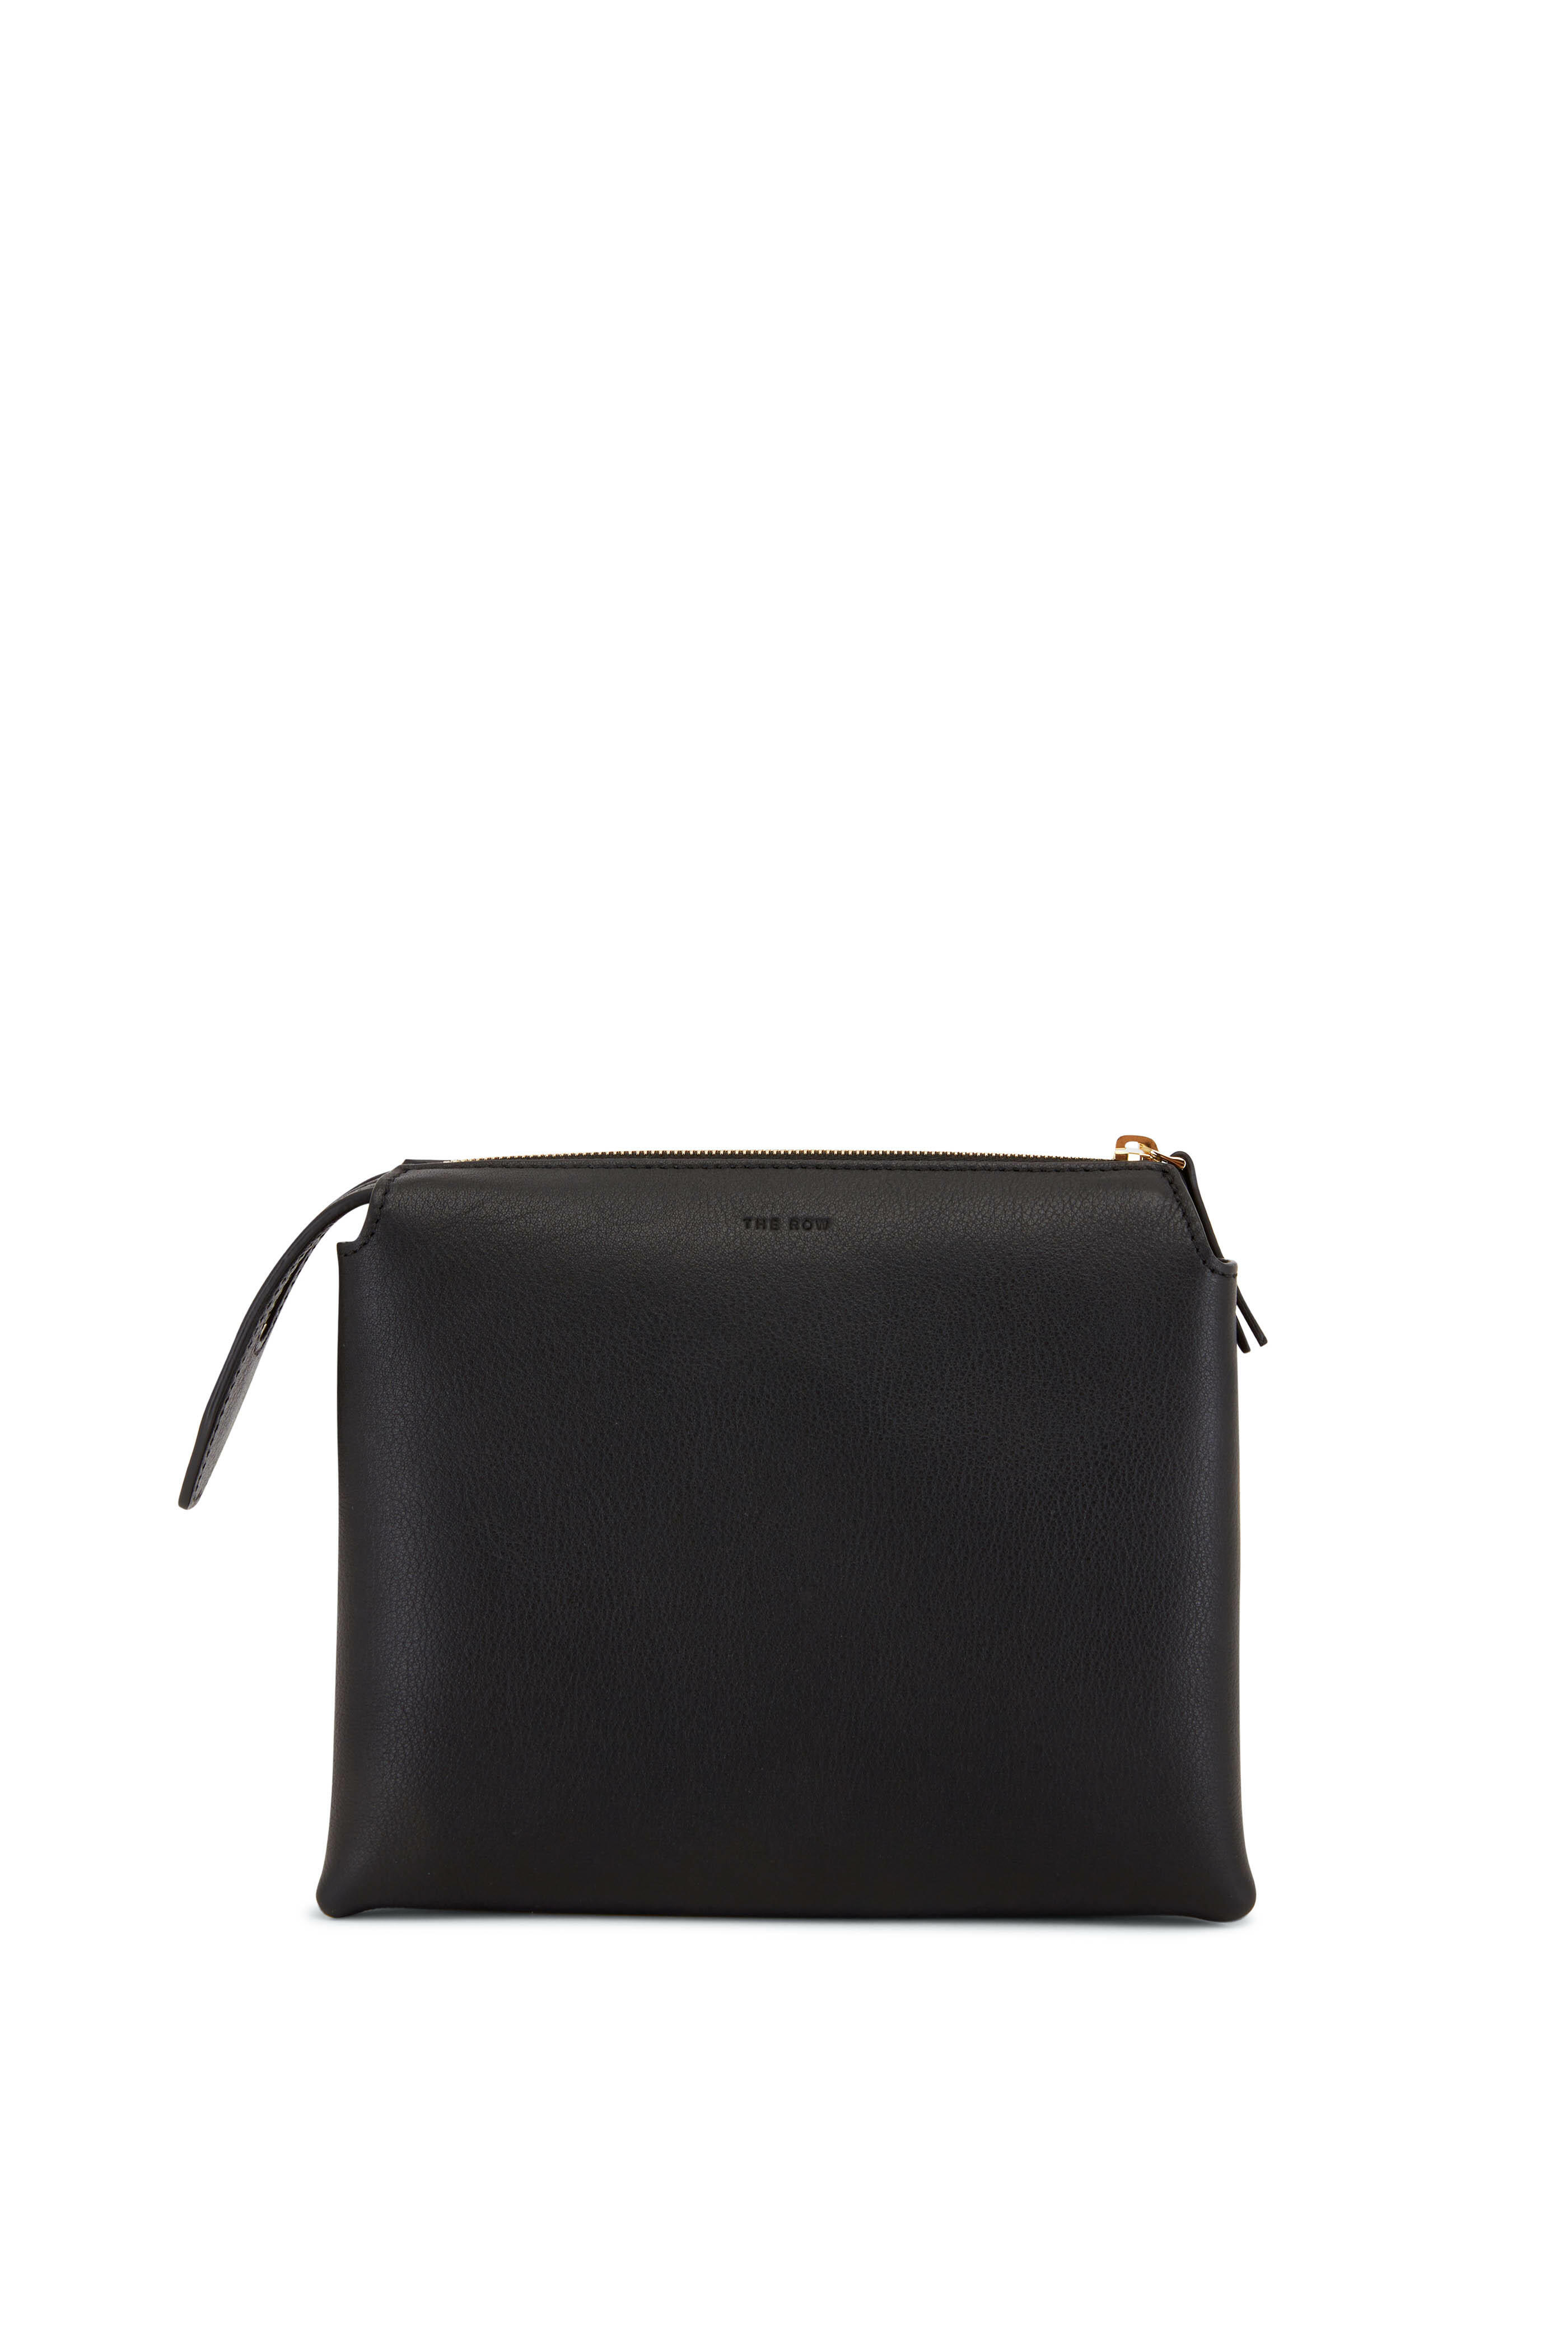 The Row - Nutwin Black Leather Mini Crossbody | Mitchell Stores